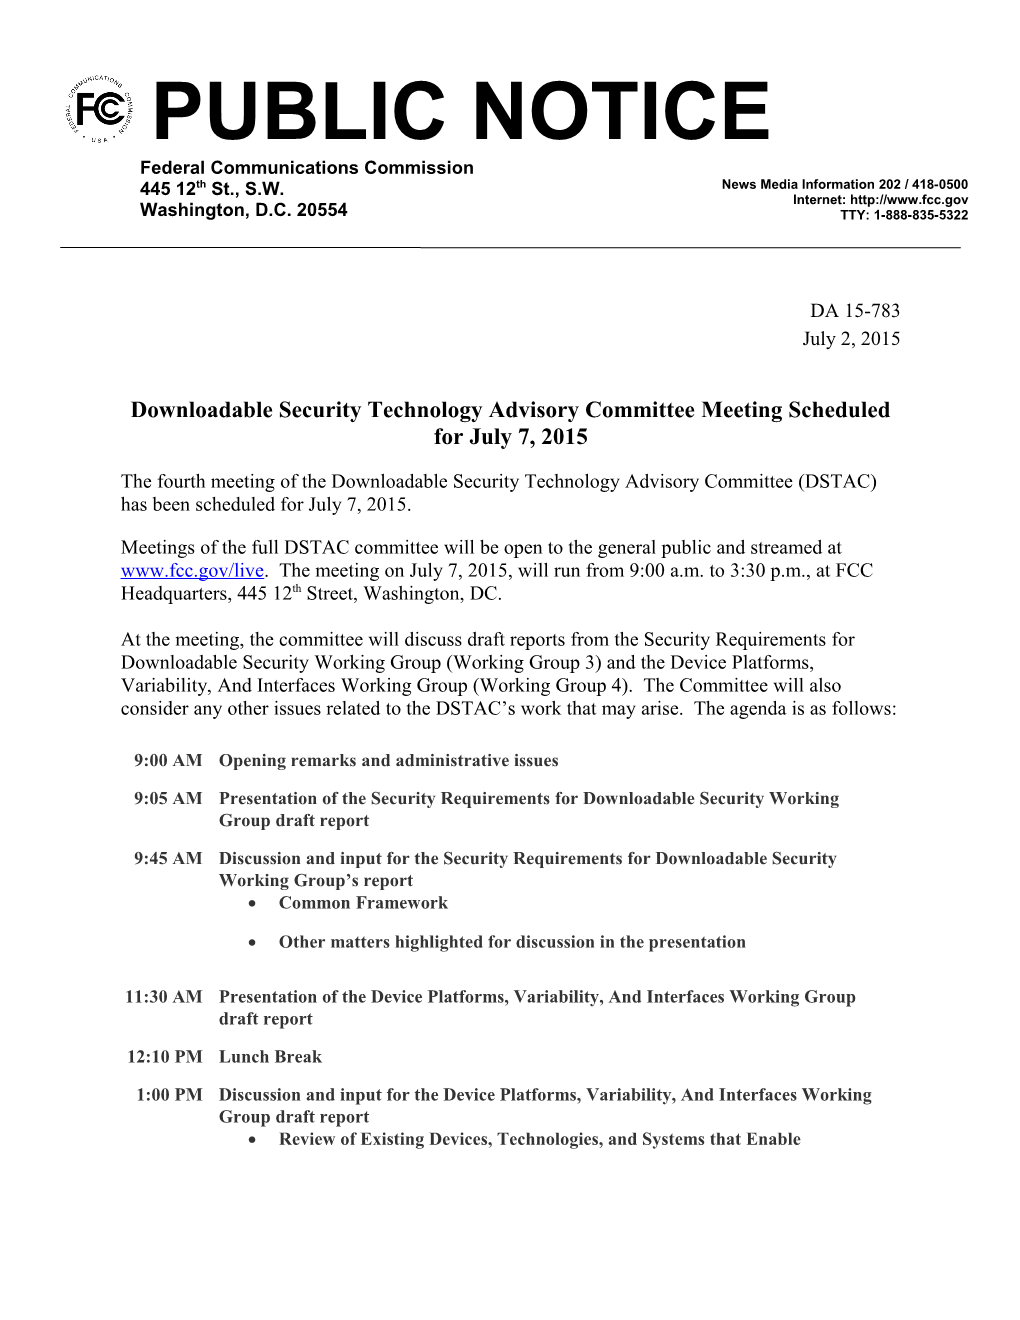 Downloadable Security Technology Advisory Committee Meeting Scheduled for July 7, 2015